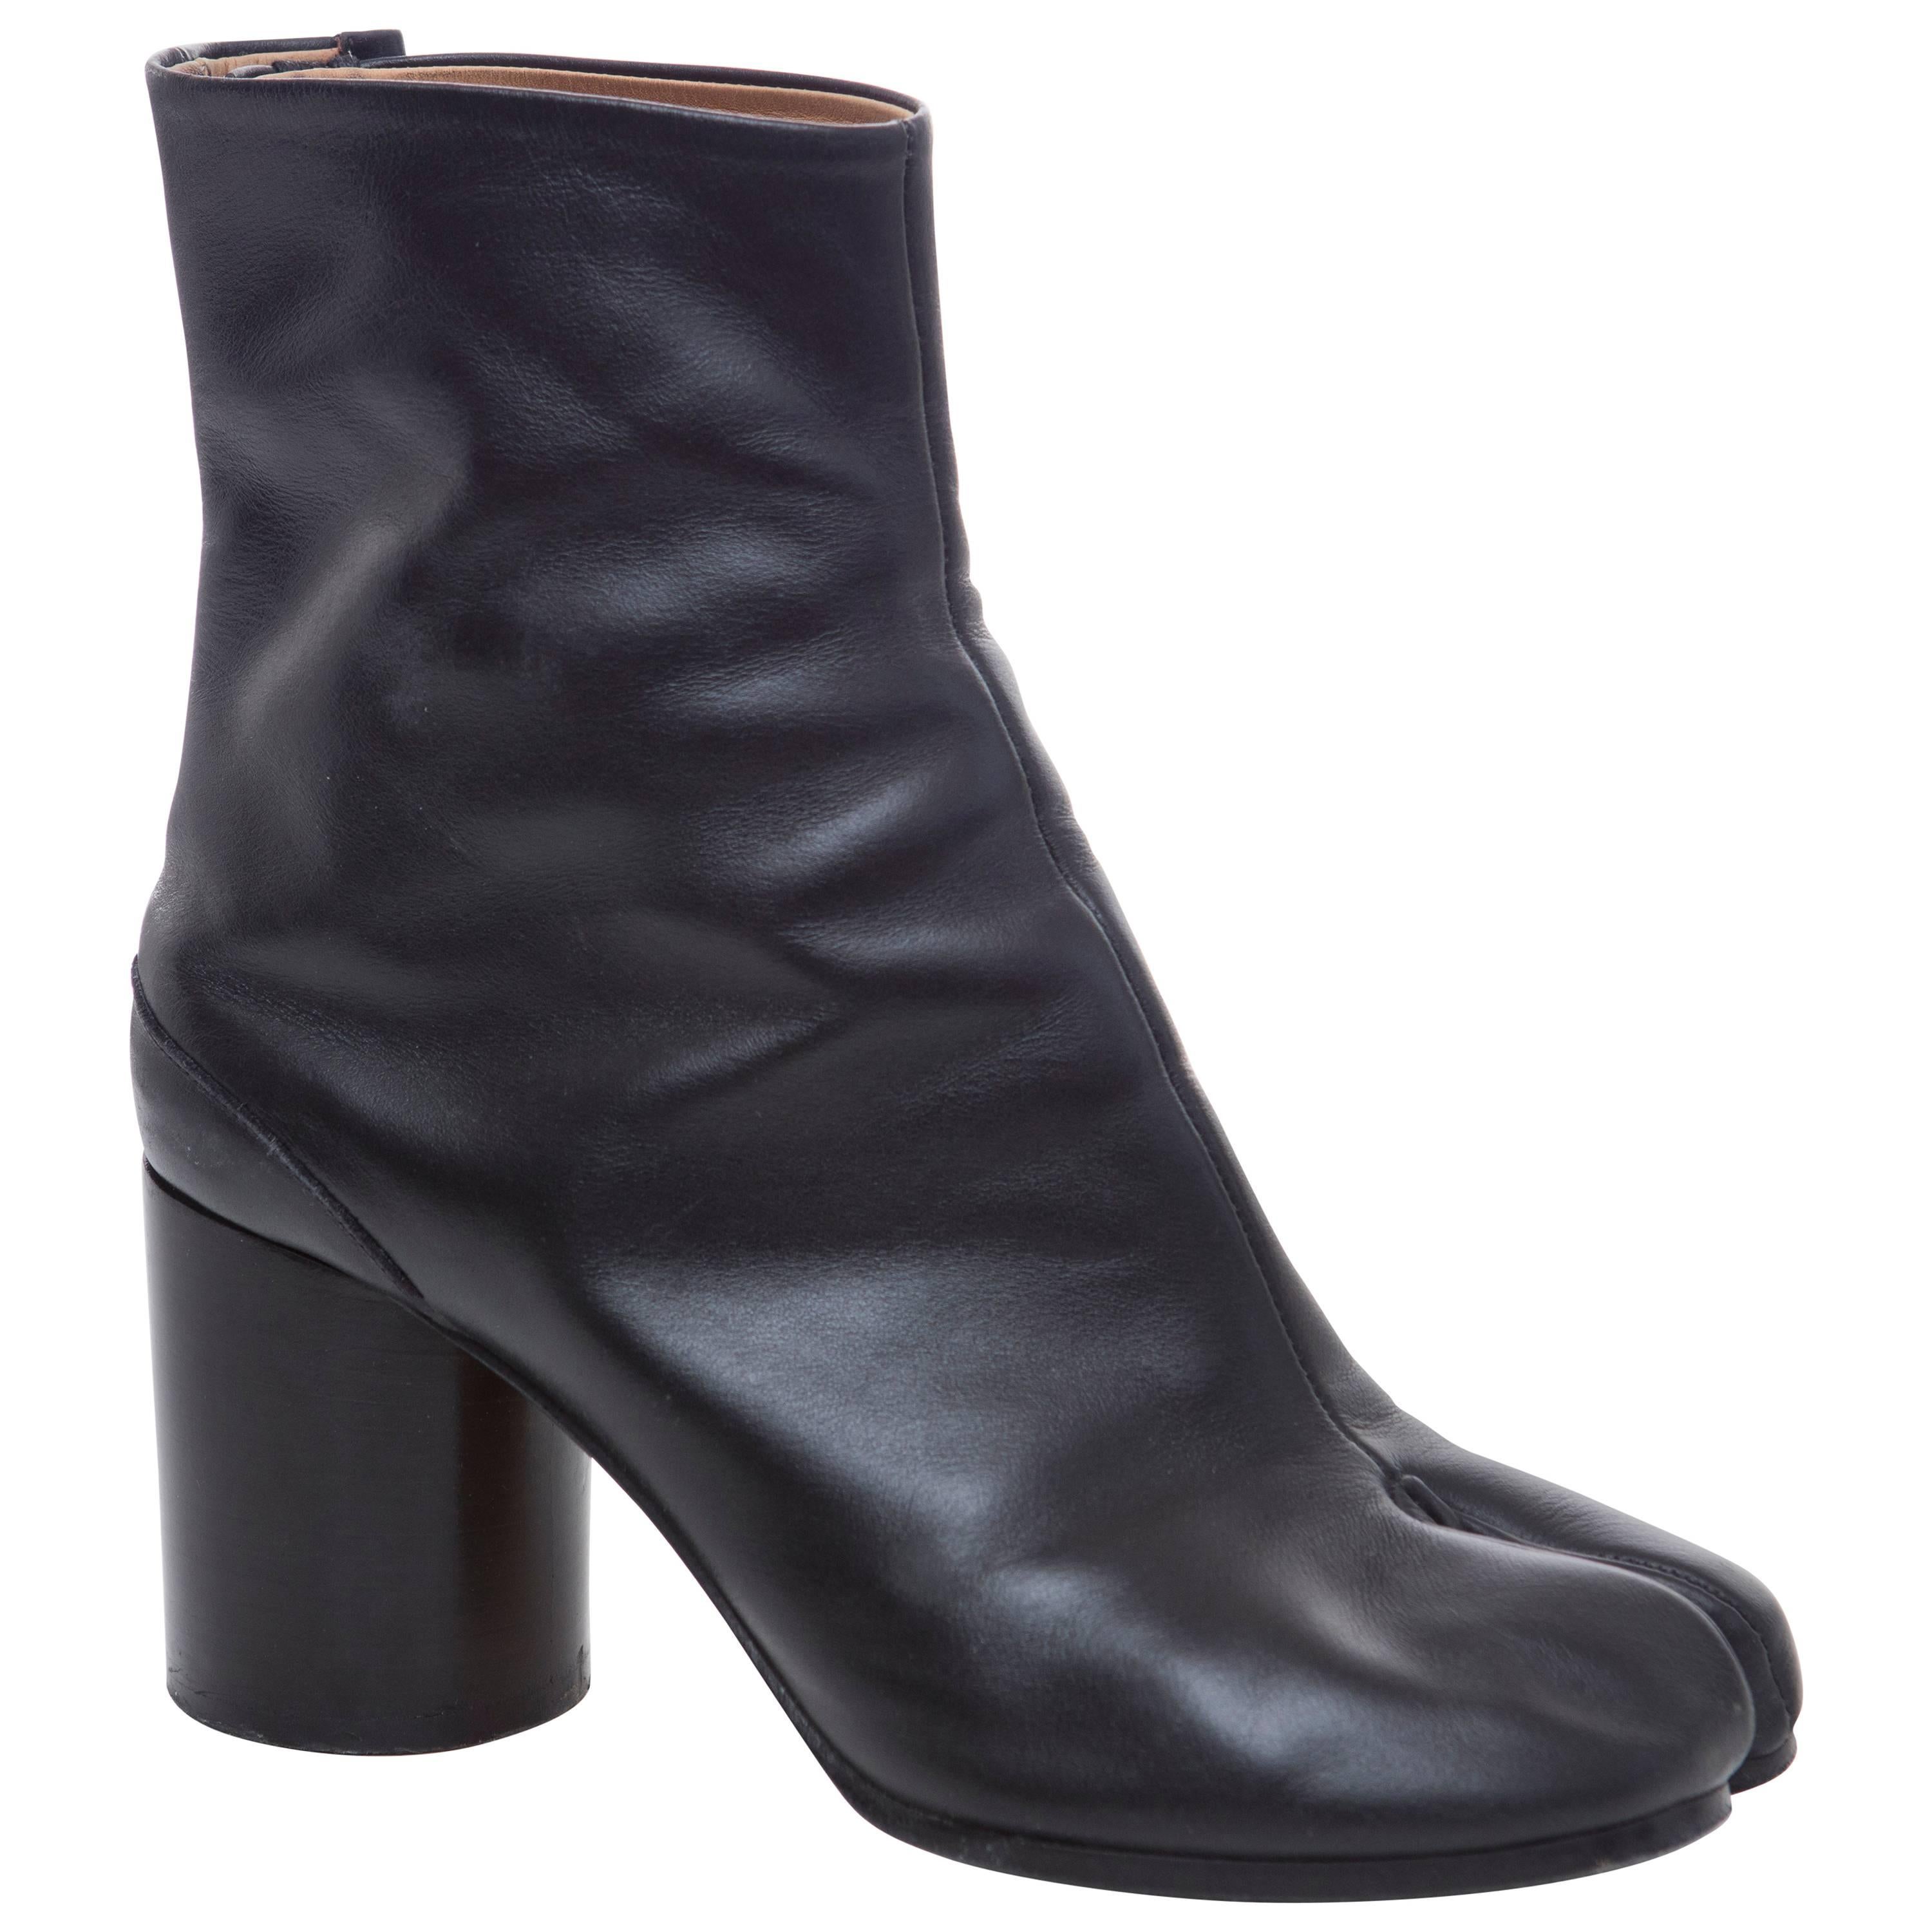 Maison Martin Margiela Black Leather Tabi Ankle Boots With Stacked